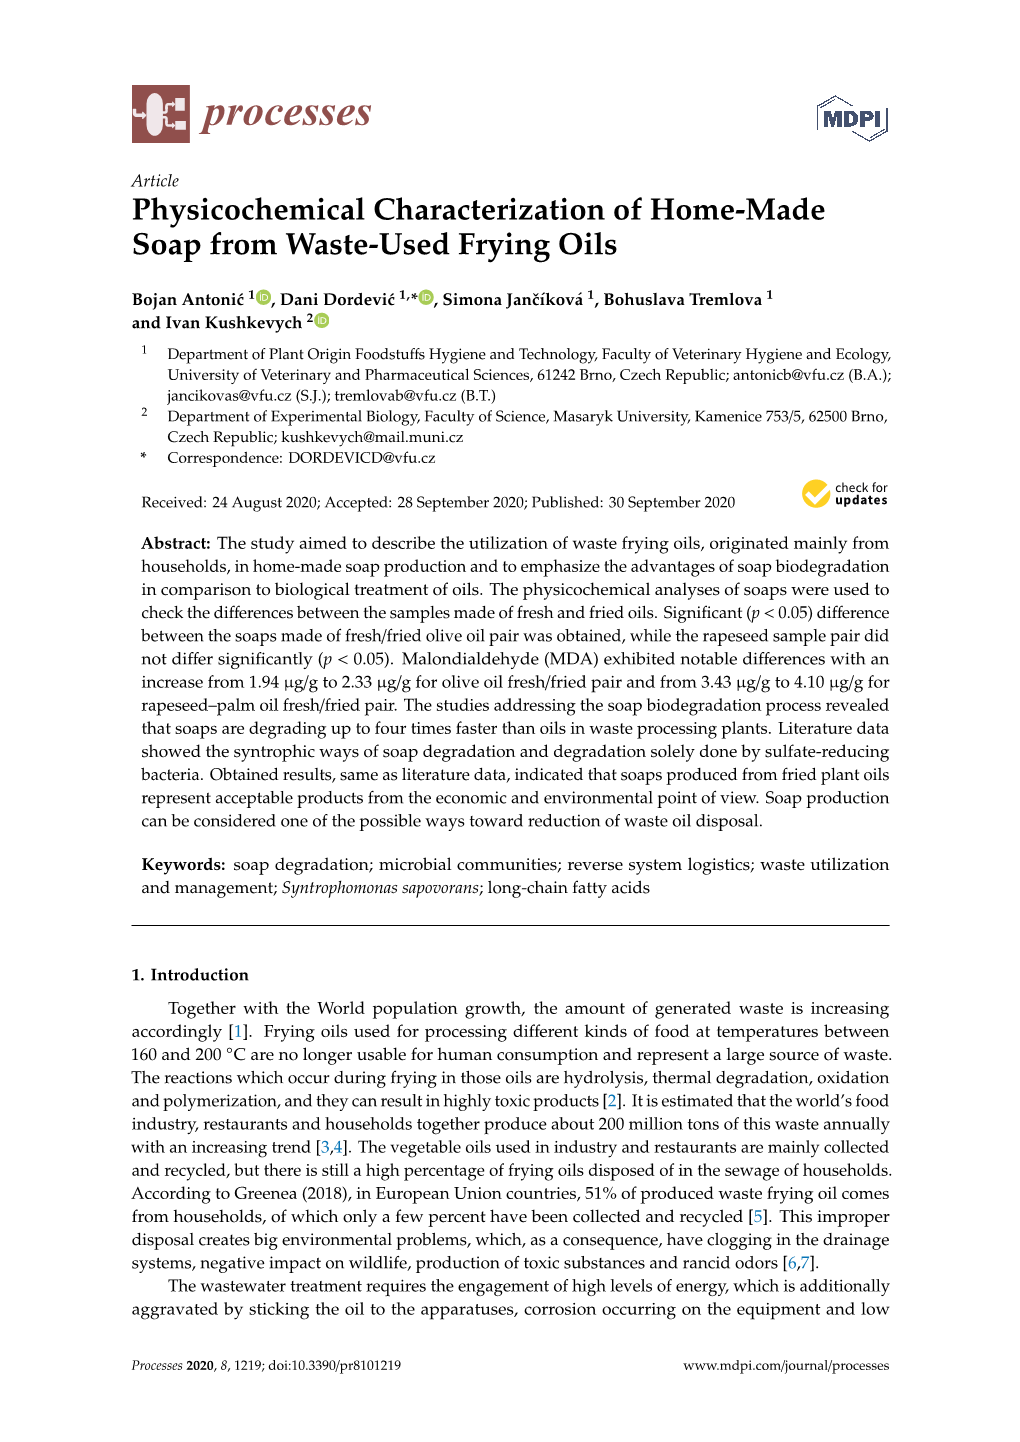 Physicochemical Characterization of Home-Made Soap from Waste-Used Frying Oils